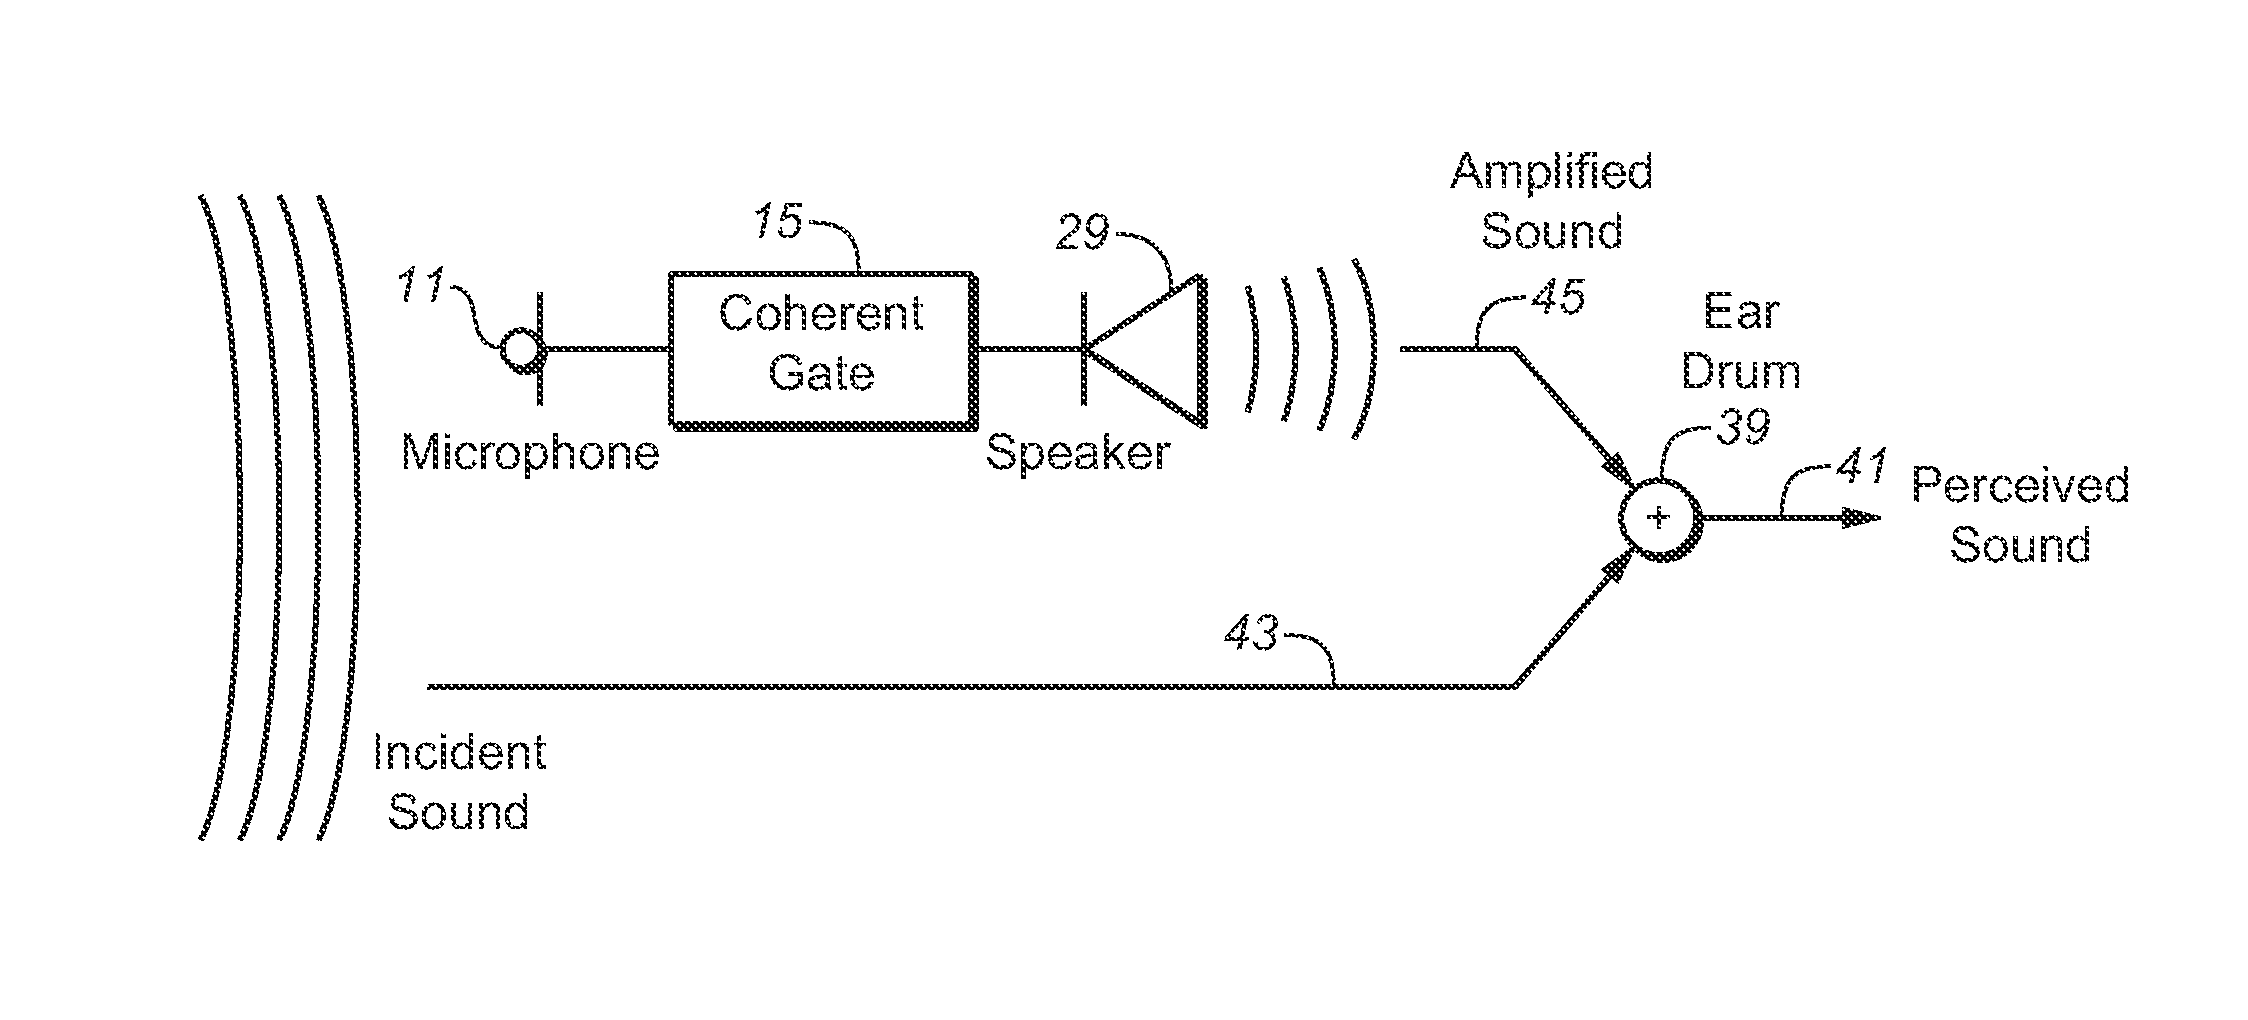 Hearing aid having level and frequency-dependent gain